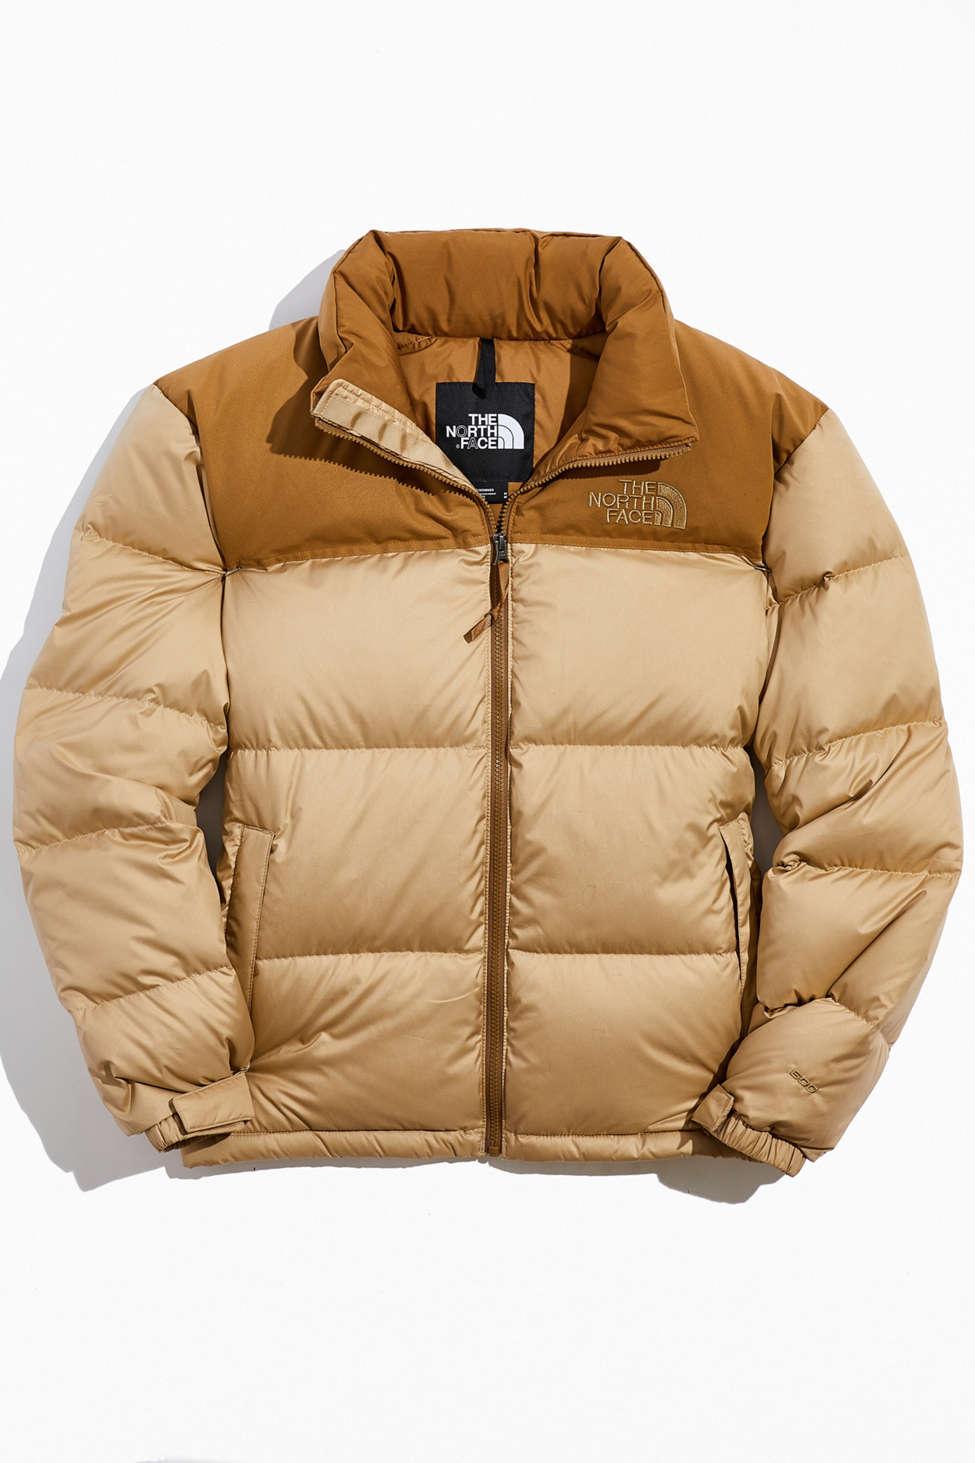 The North Face Eco Nuptse Recycled Puffer Jacket in Natural for